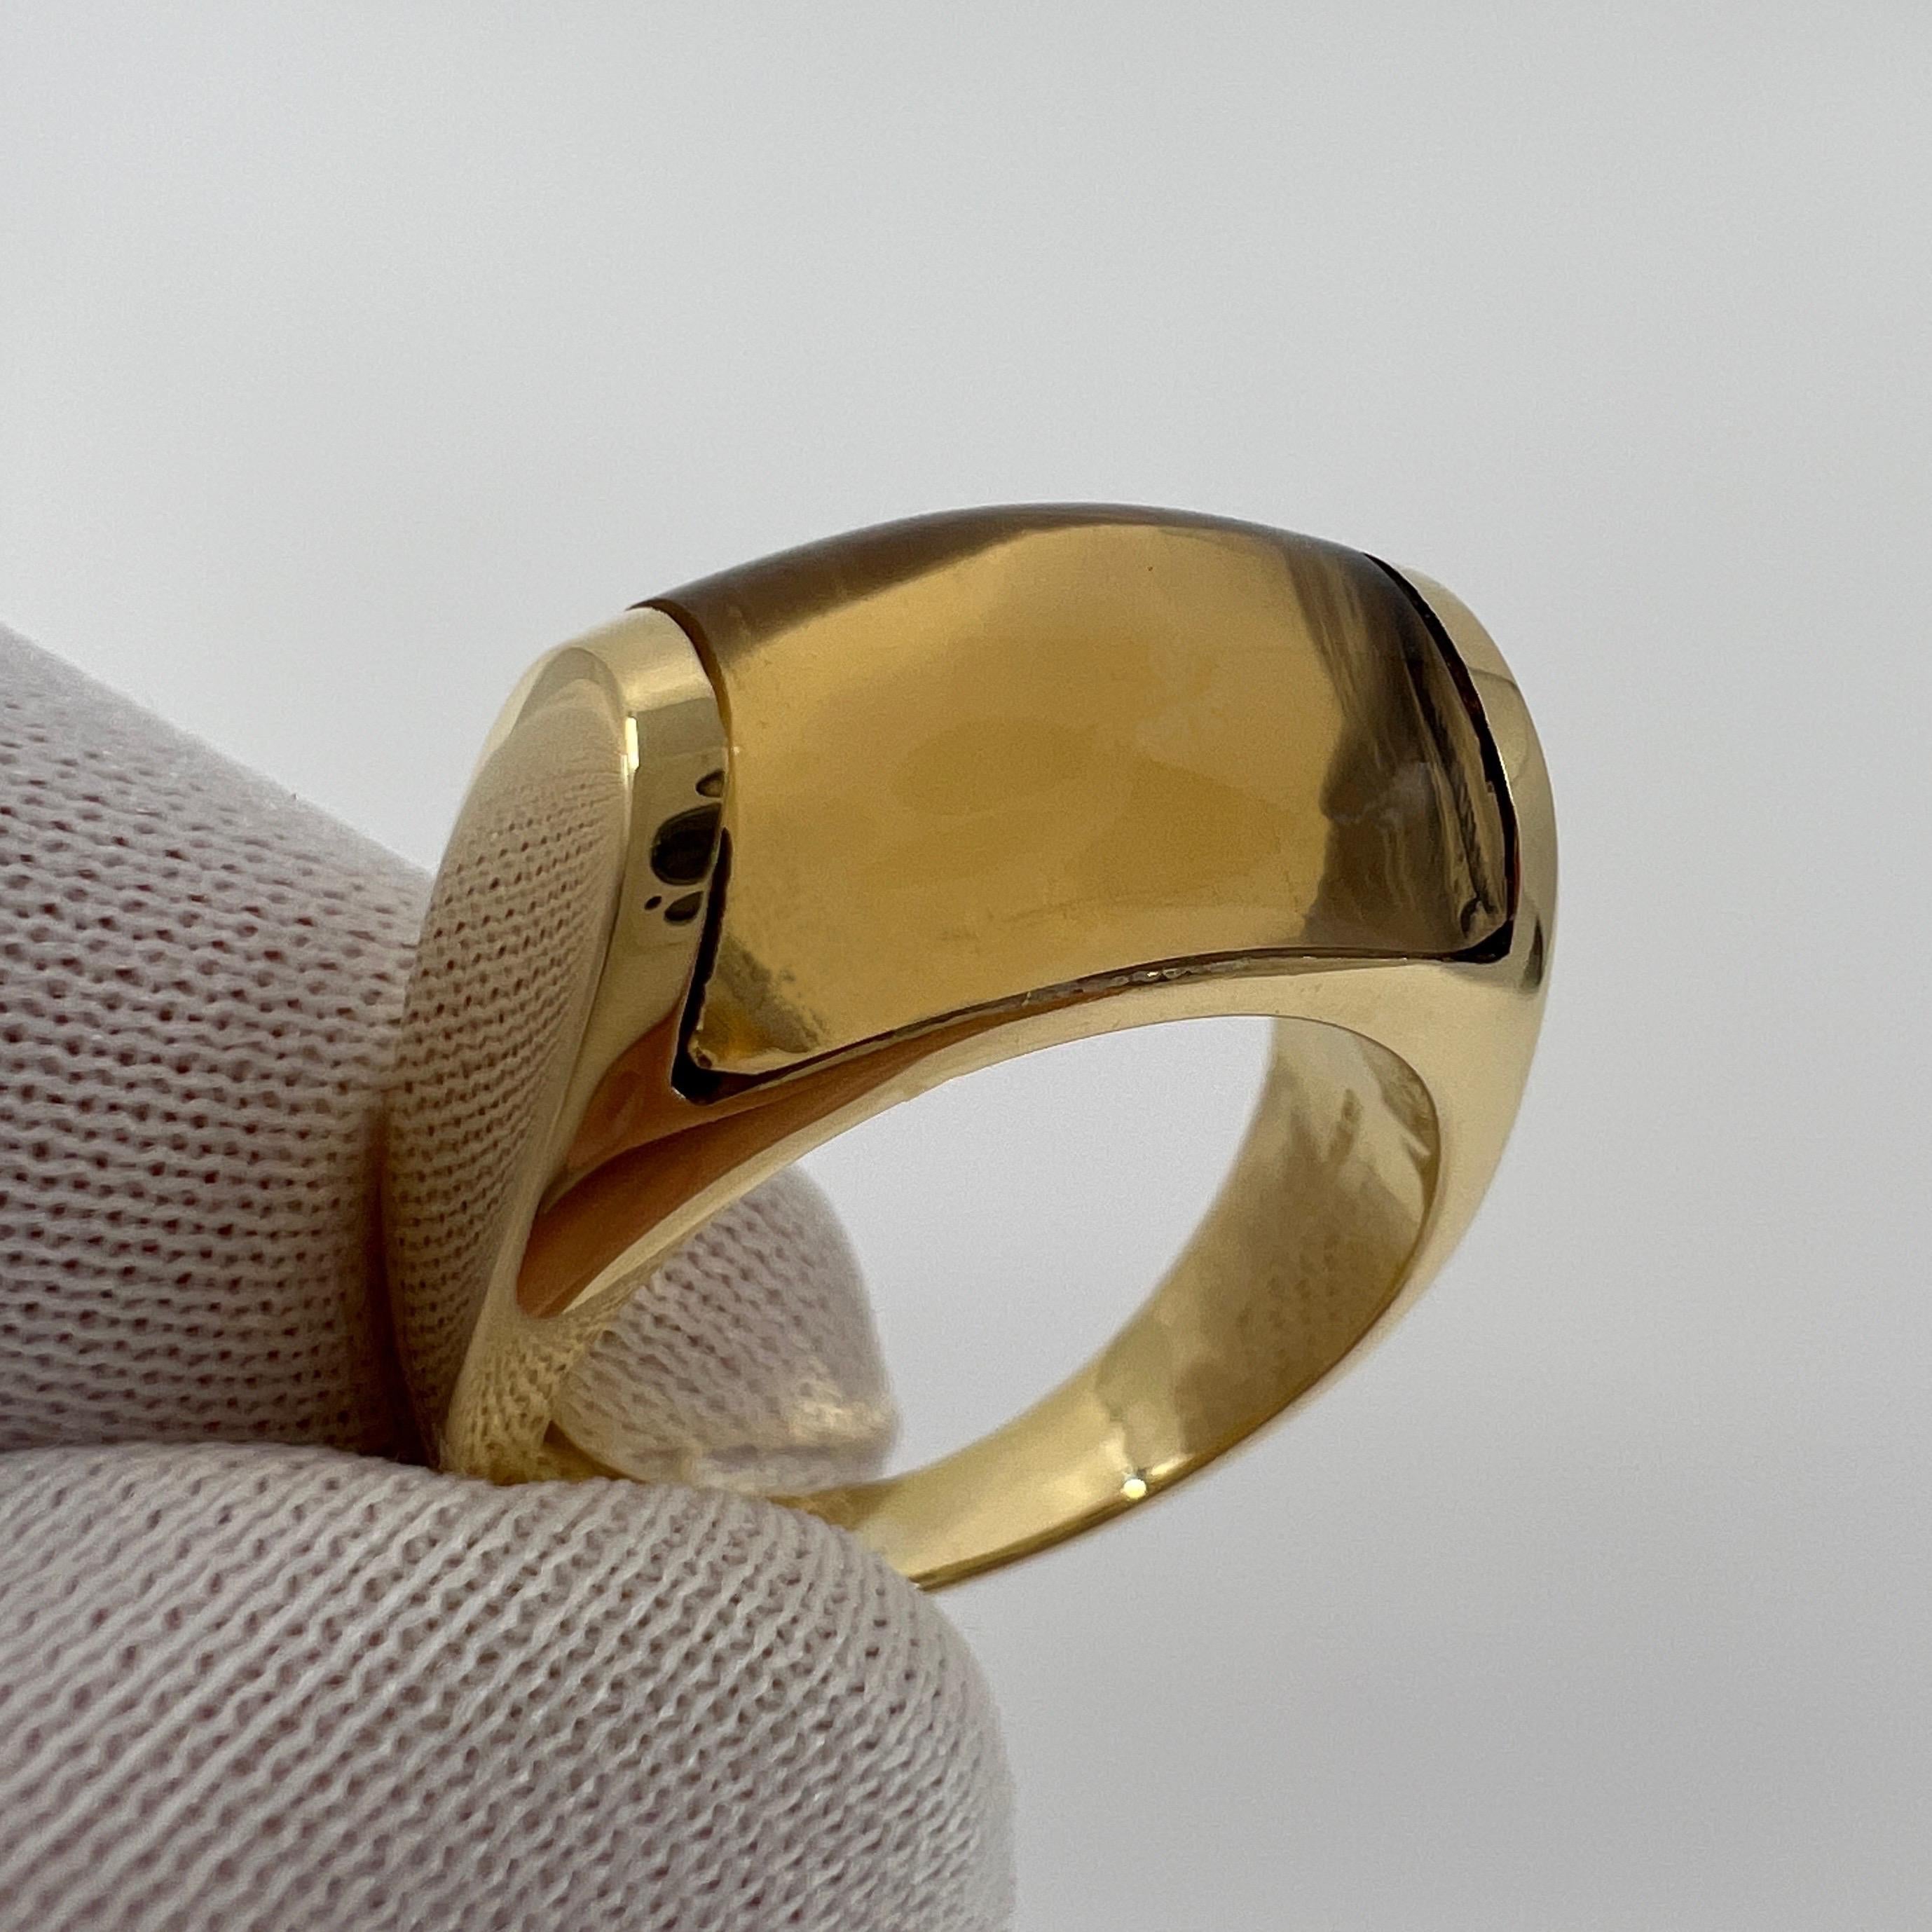 Rare Bvlgari Vivid Yellow Citrine Tronchetto 18k Yellow Gold Ring.

Beautiful domed yellow citrine set in a fine 18k yellow gold tension set ring.

In excellent condition, has been professionally polished and cleaned.

Ring size: UK K - US 5.5 - EU